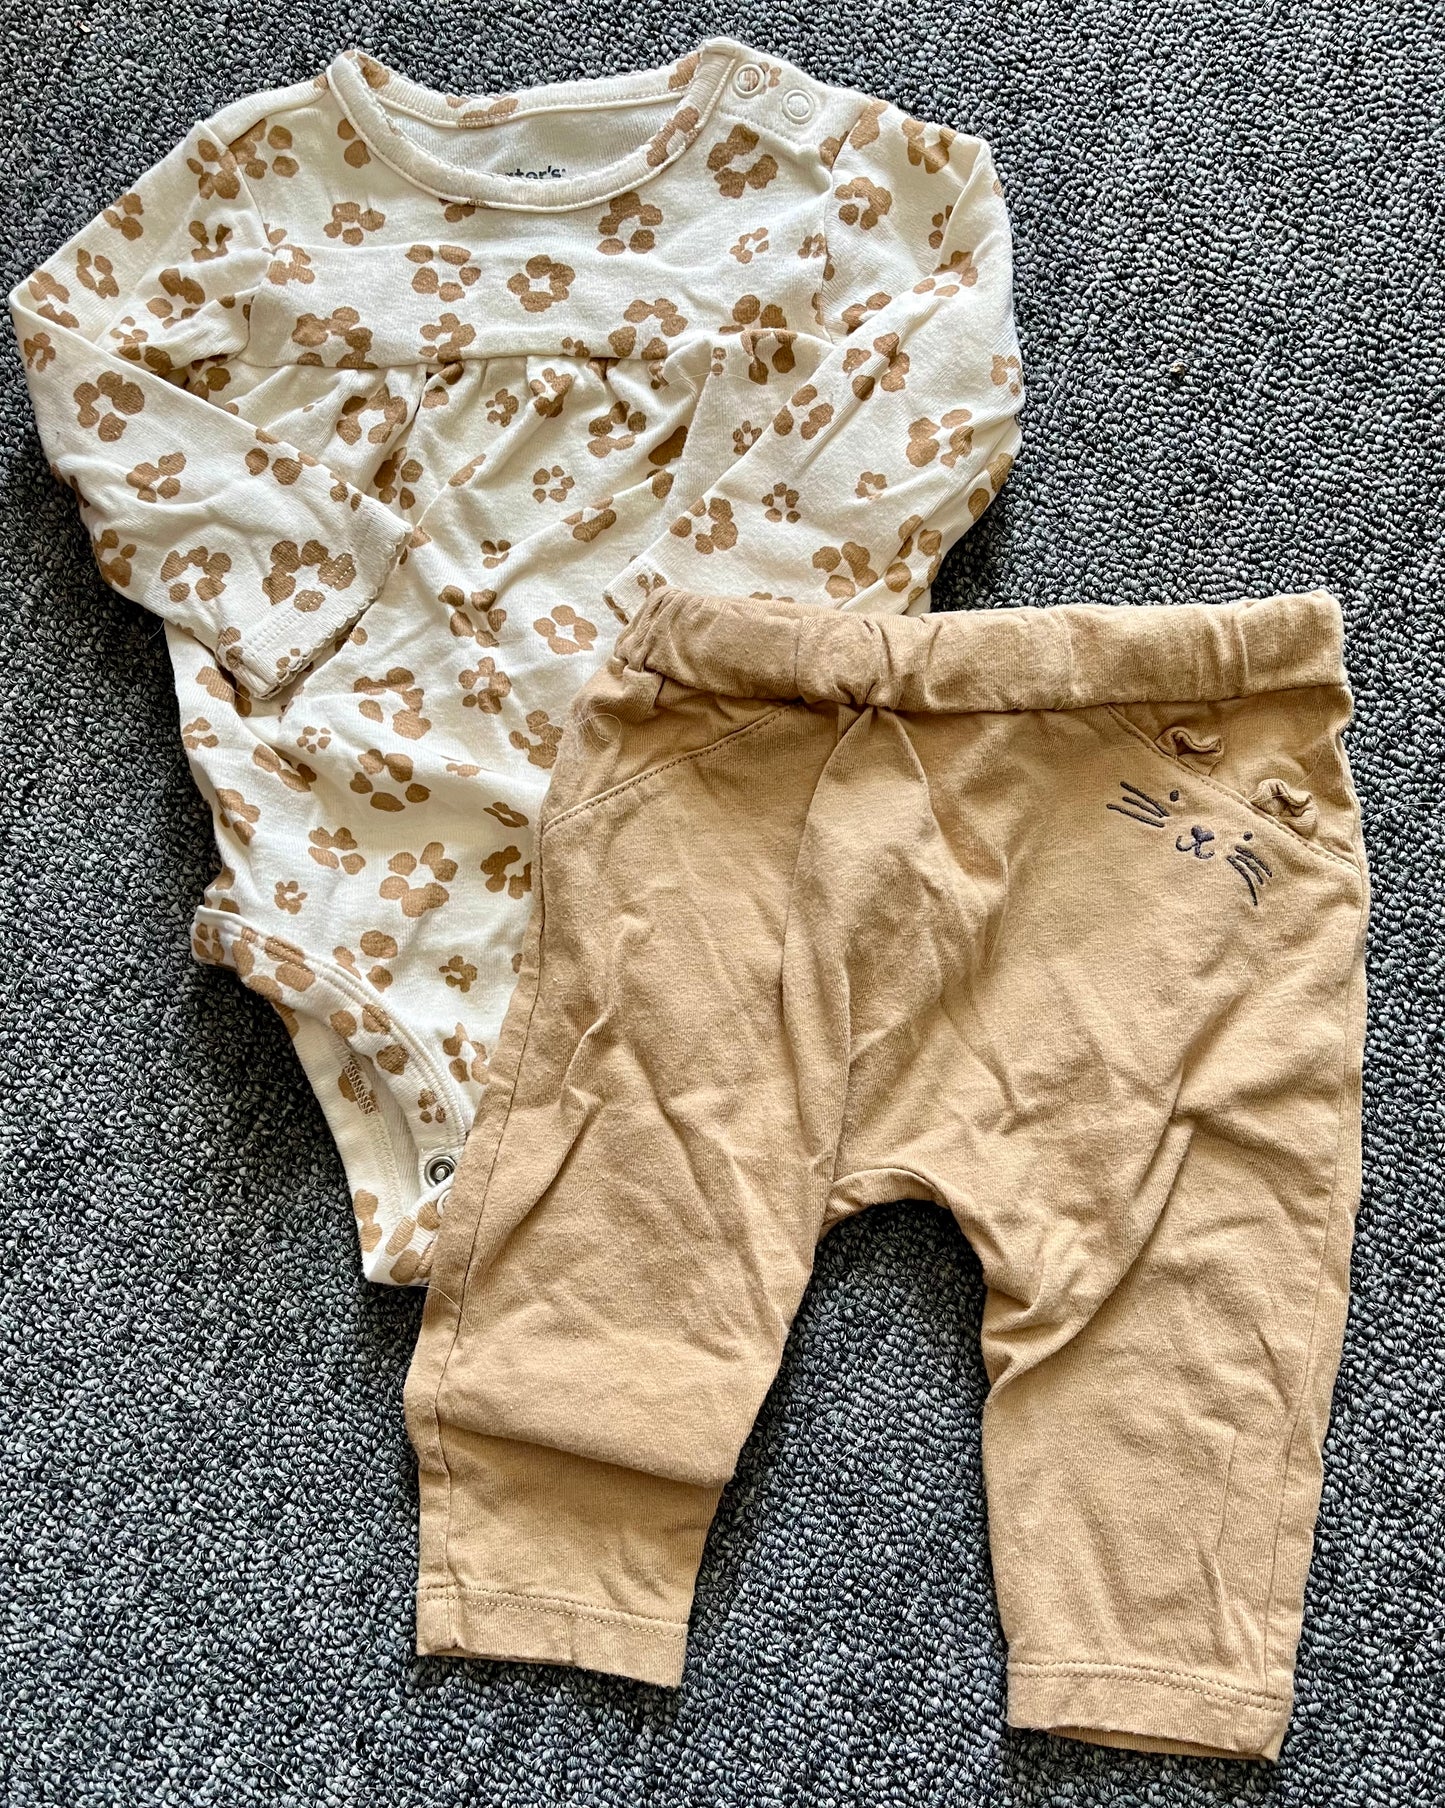 Carters girls 6 month tan and leopard outfit